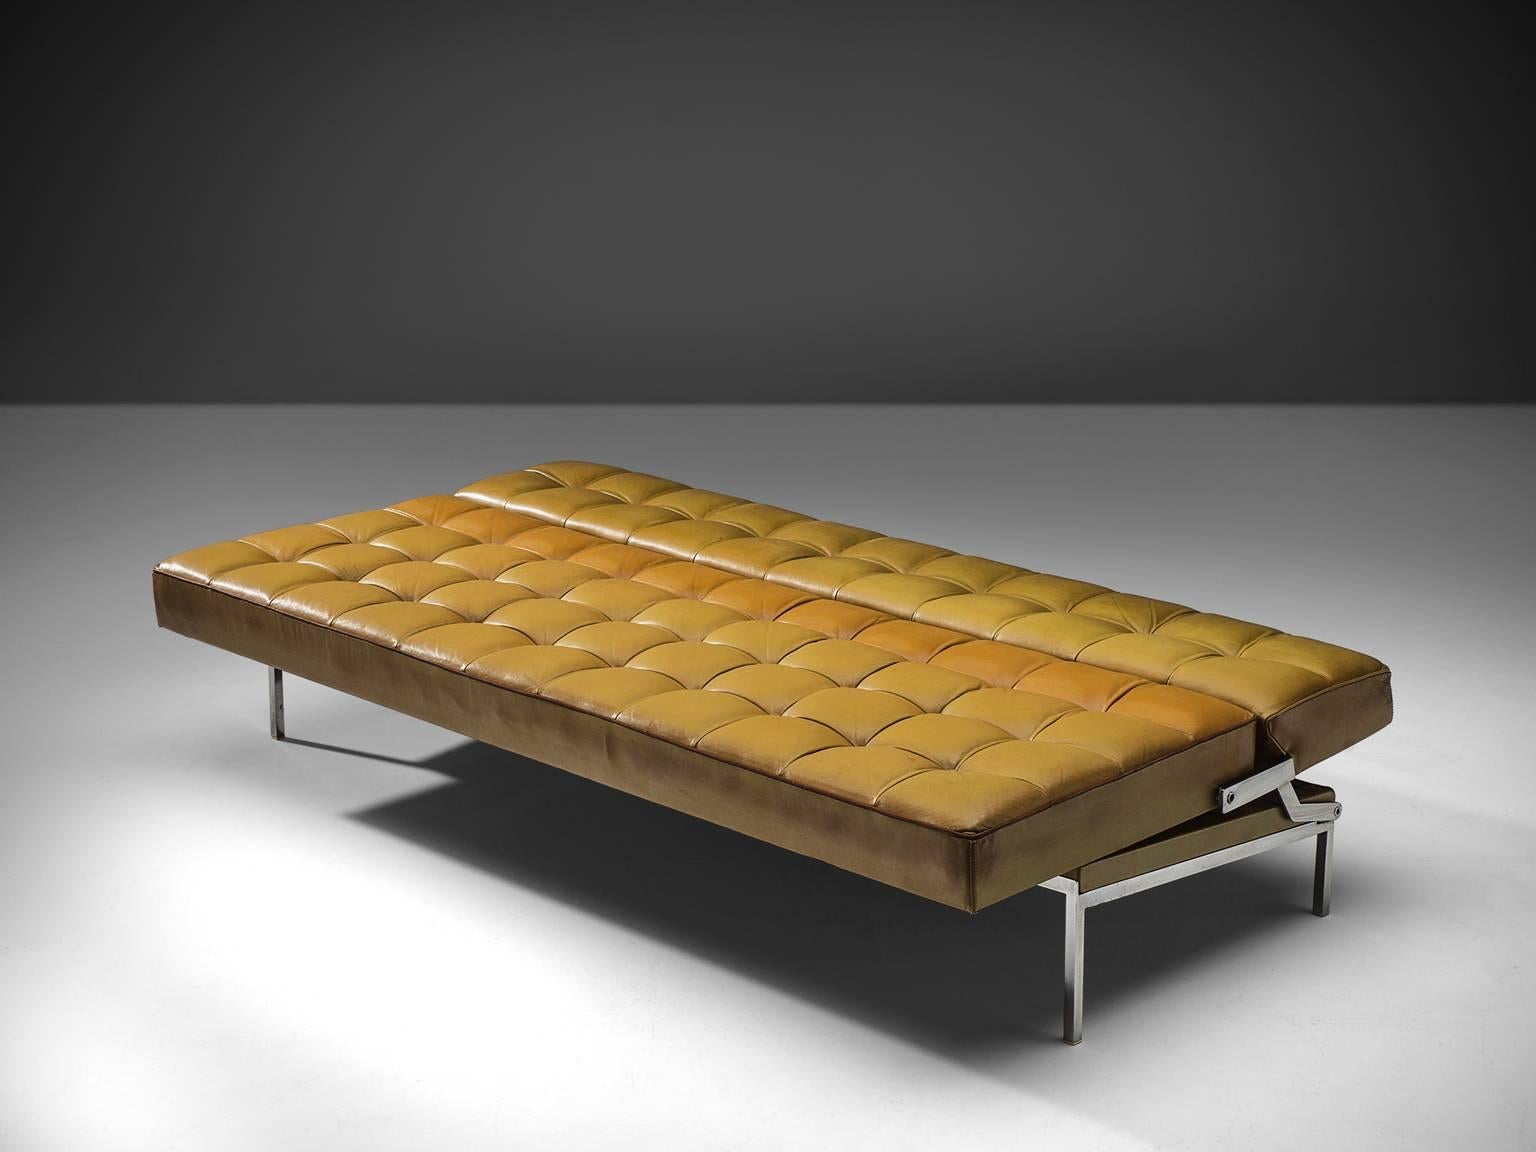 Steel Johannes Spalt for Wittmann 'Constanze' Leather Daybed